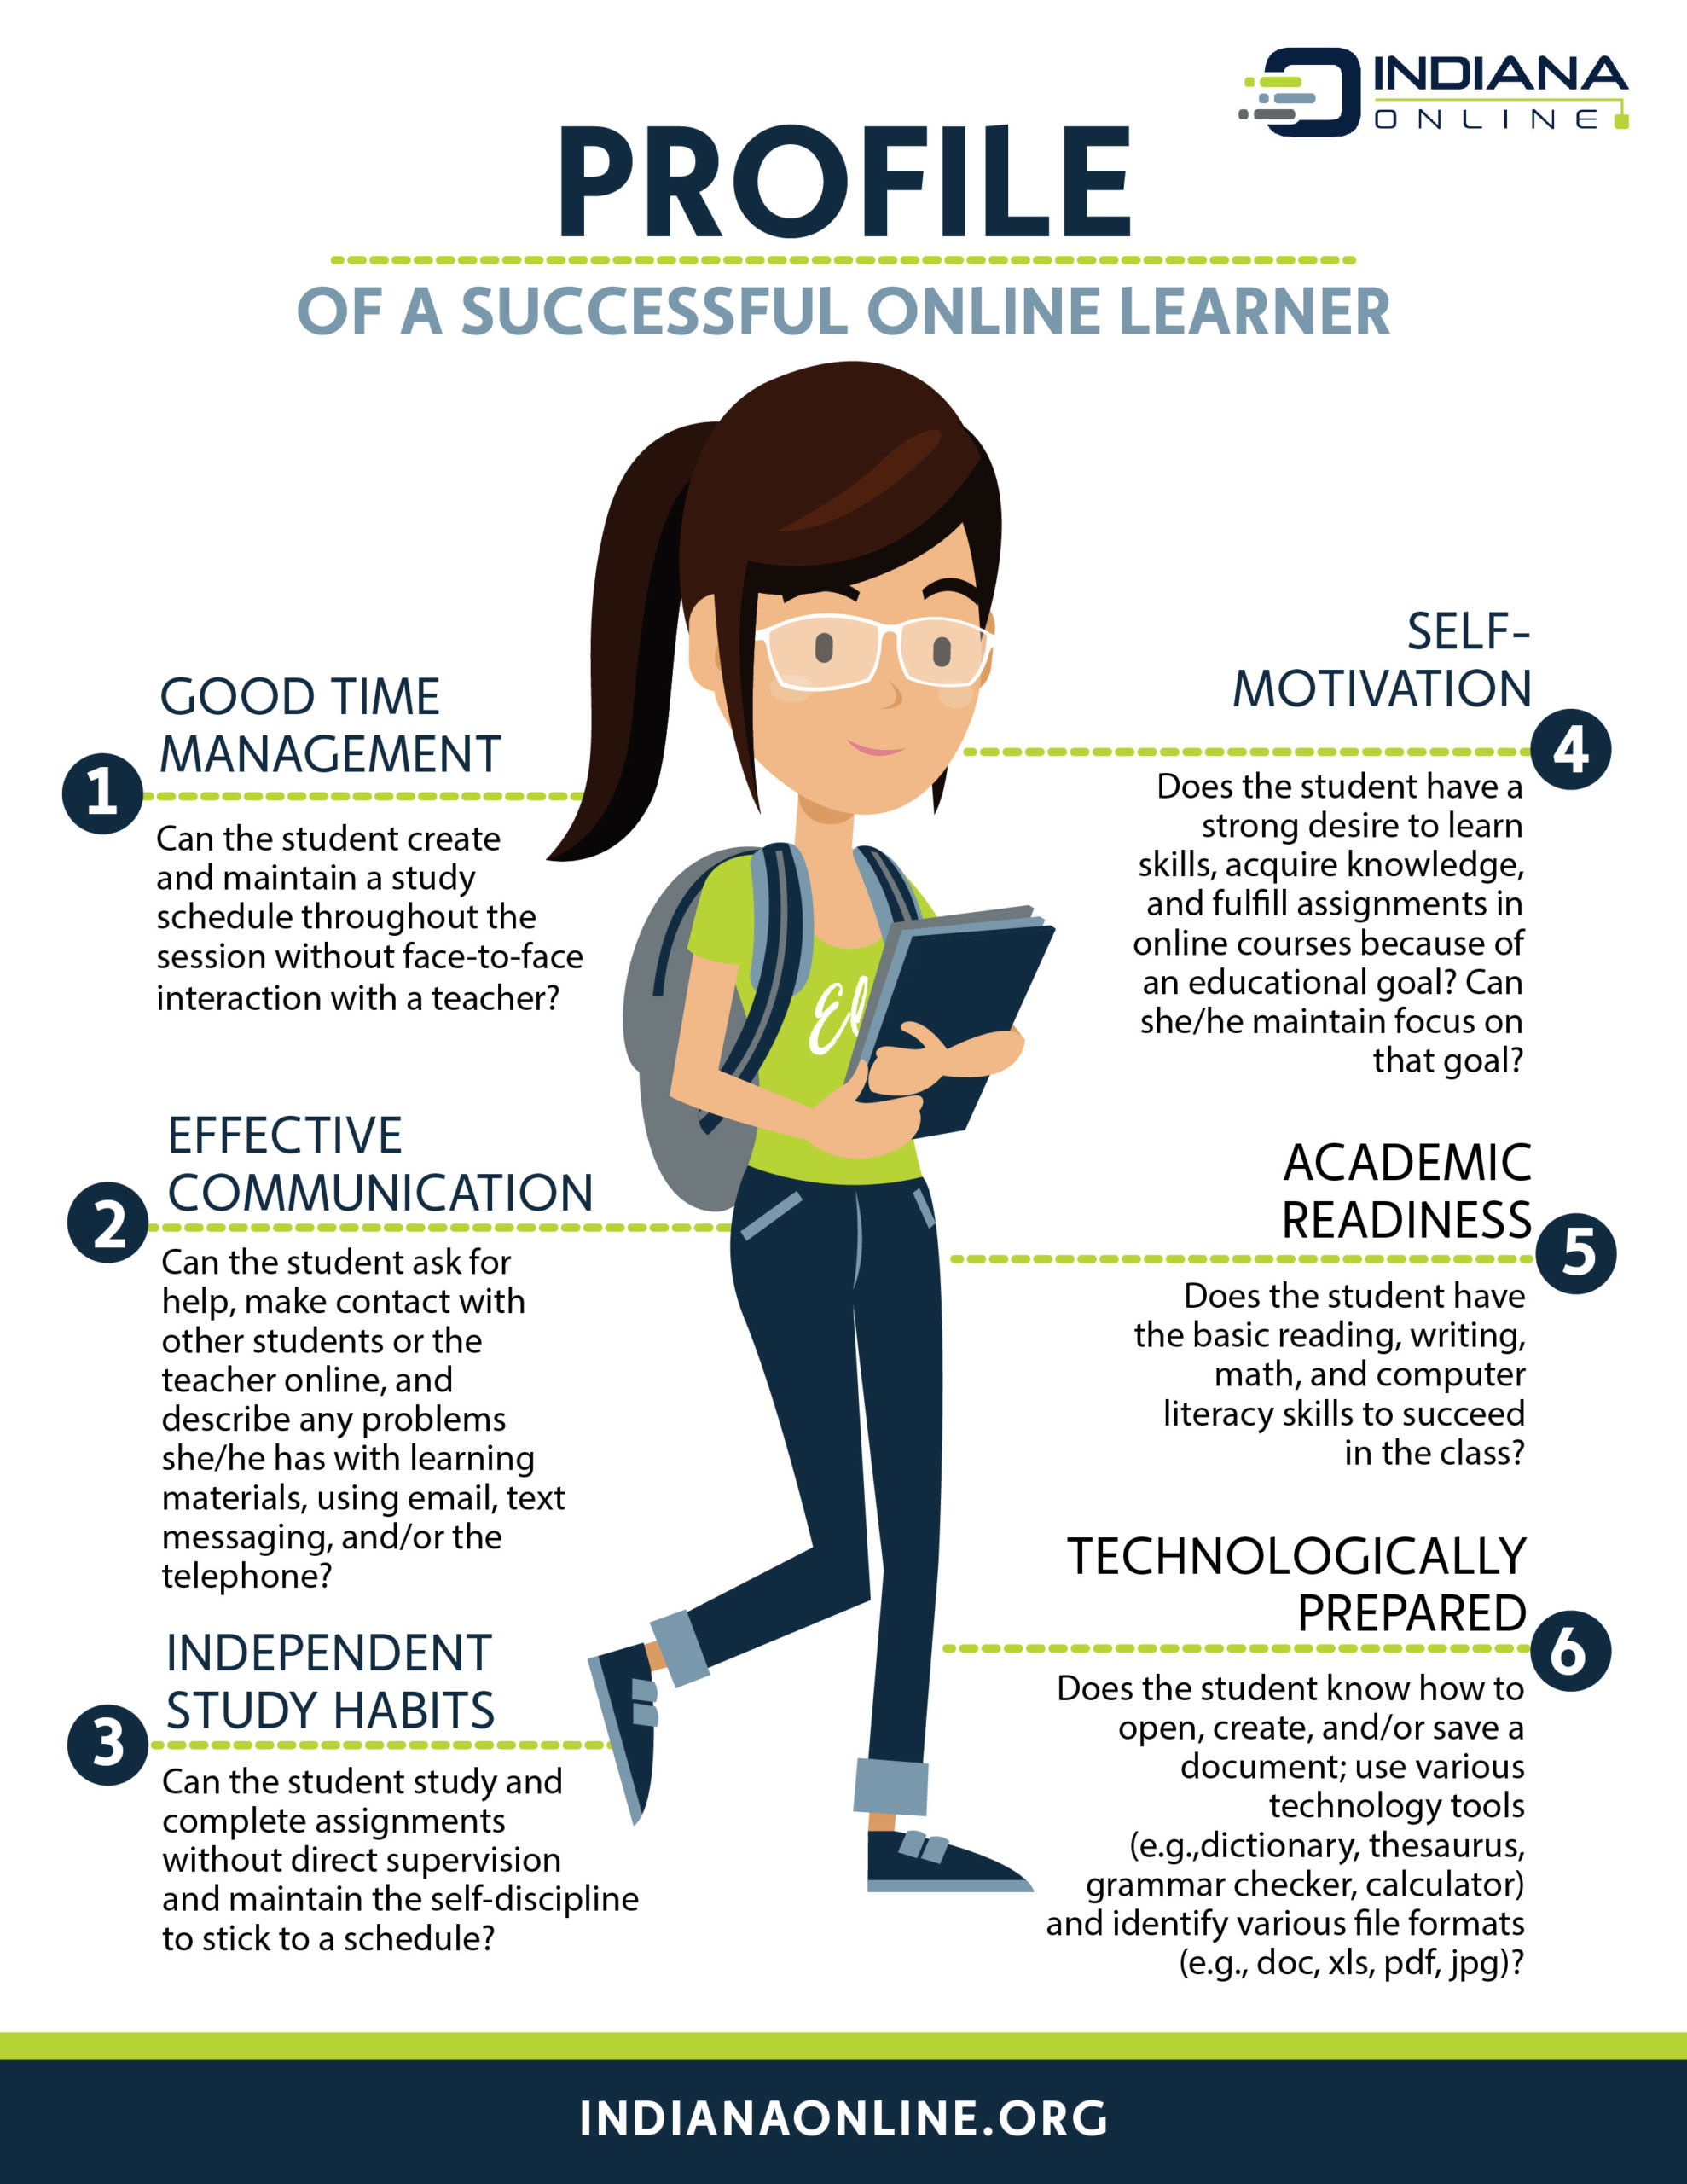 Profile of a Successful Online Learner - Indiana Online